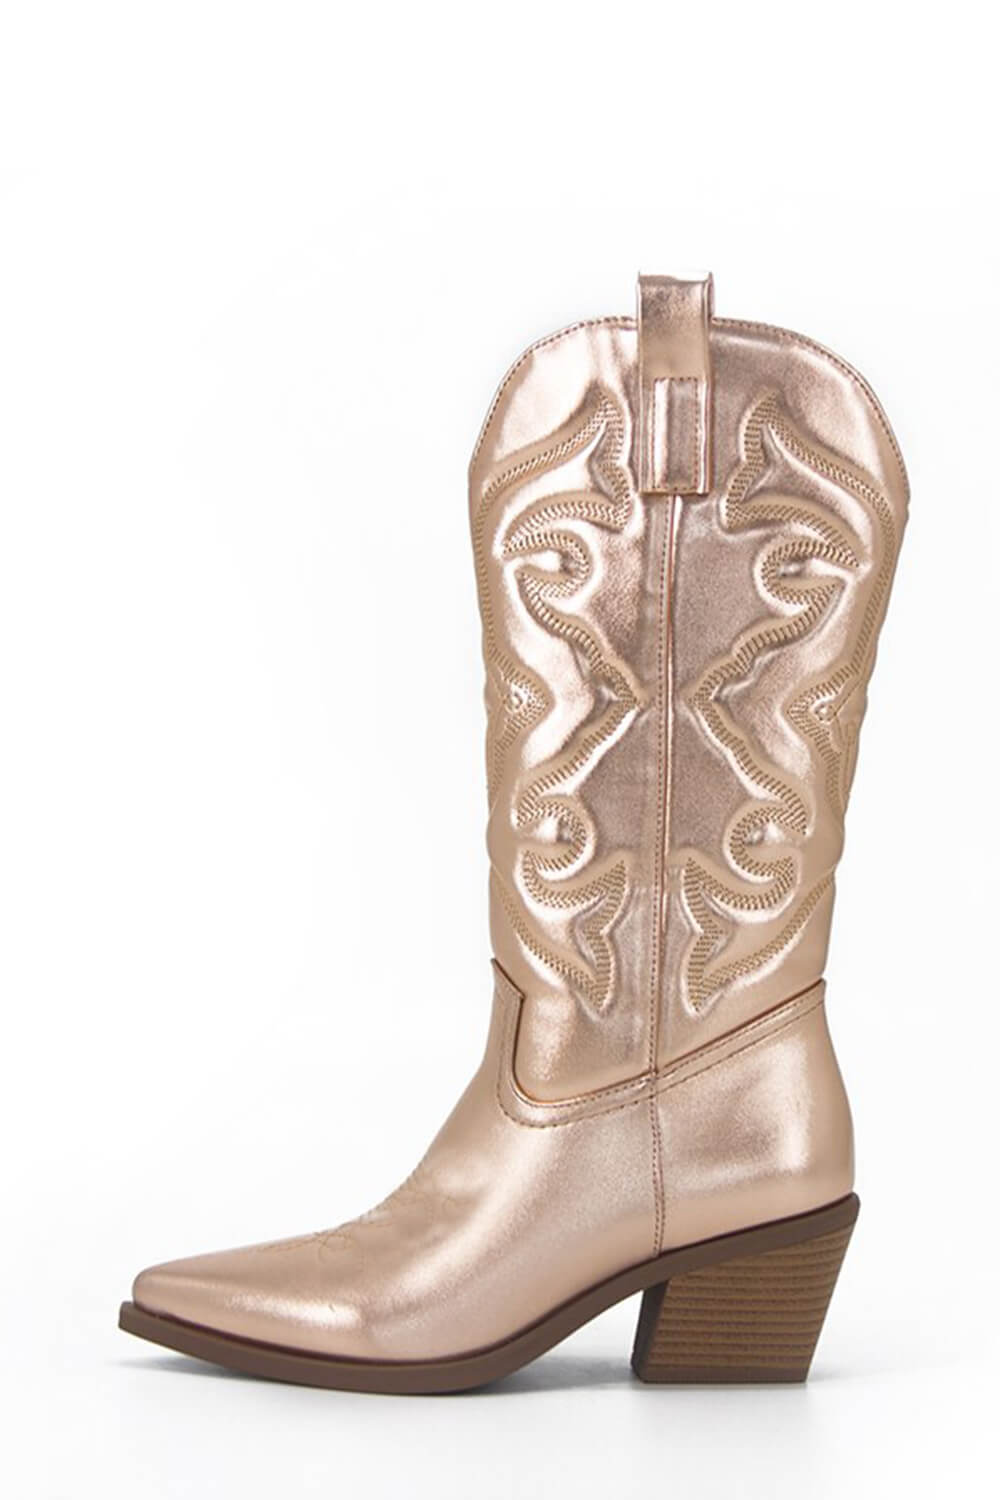 Champagne Metallic Mid-Calf Western Cowboy Pointed Toe Block Heeled Boot